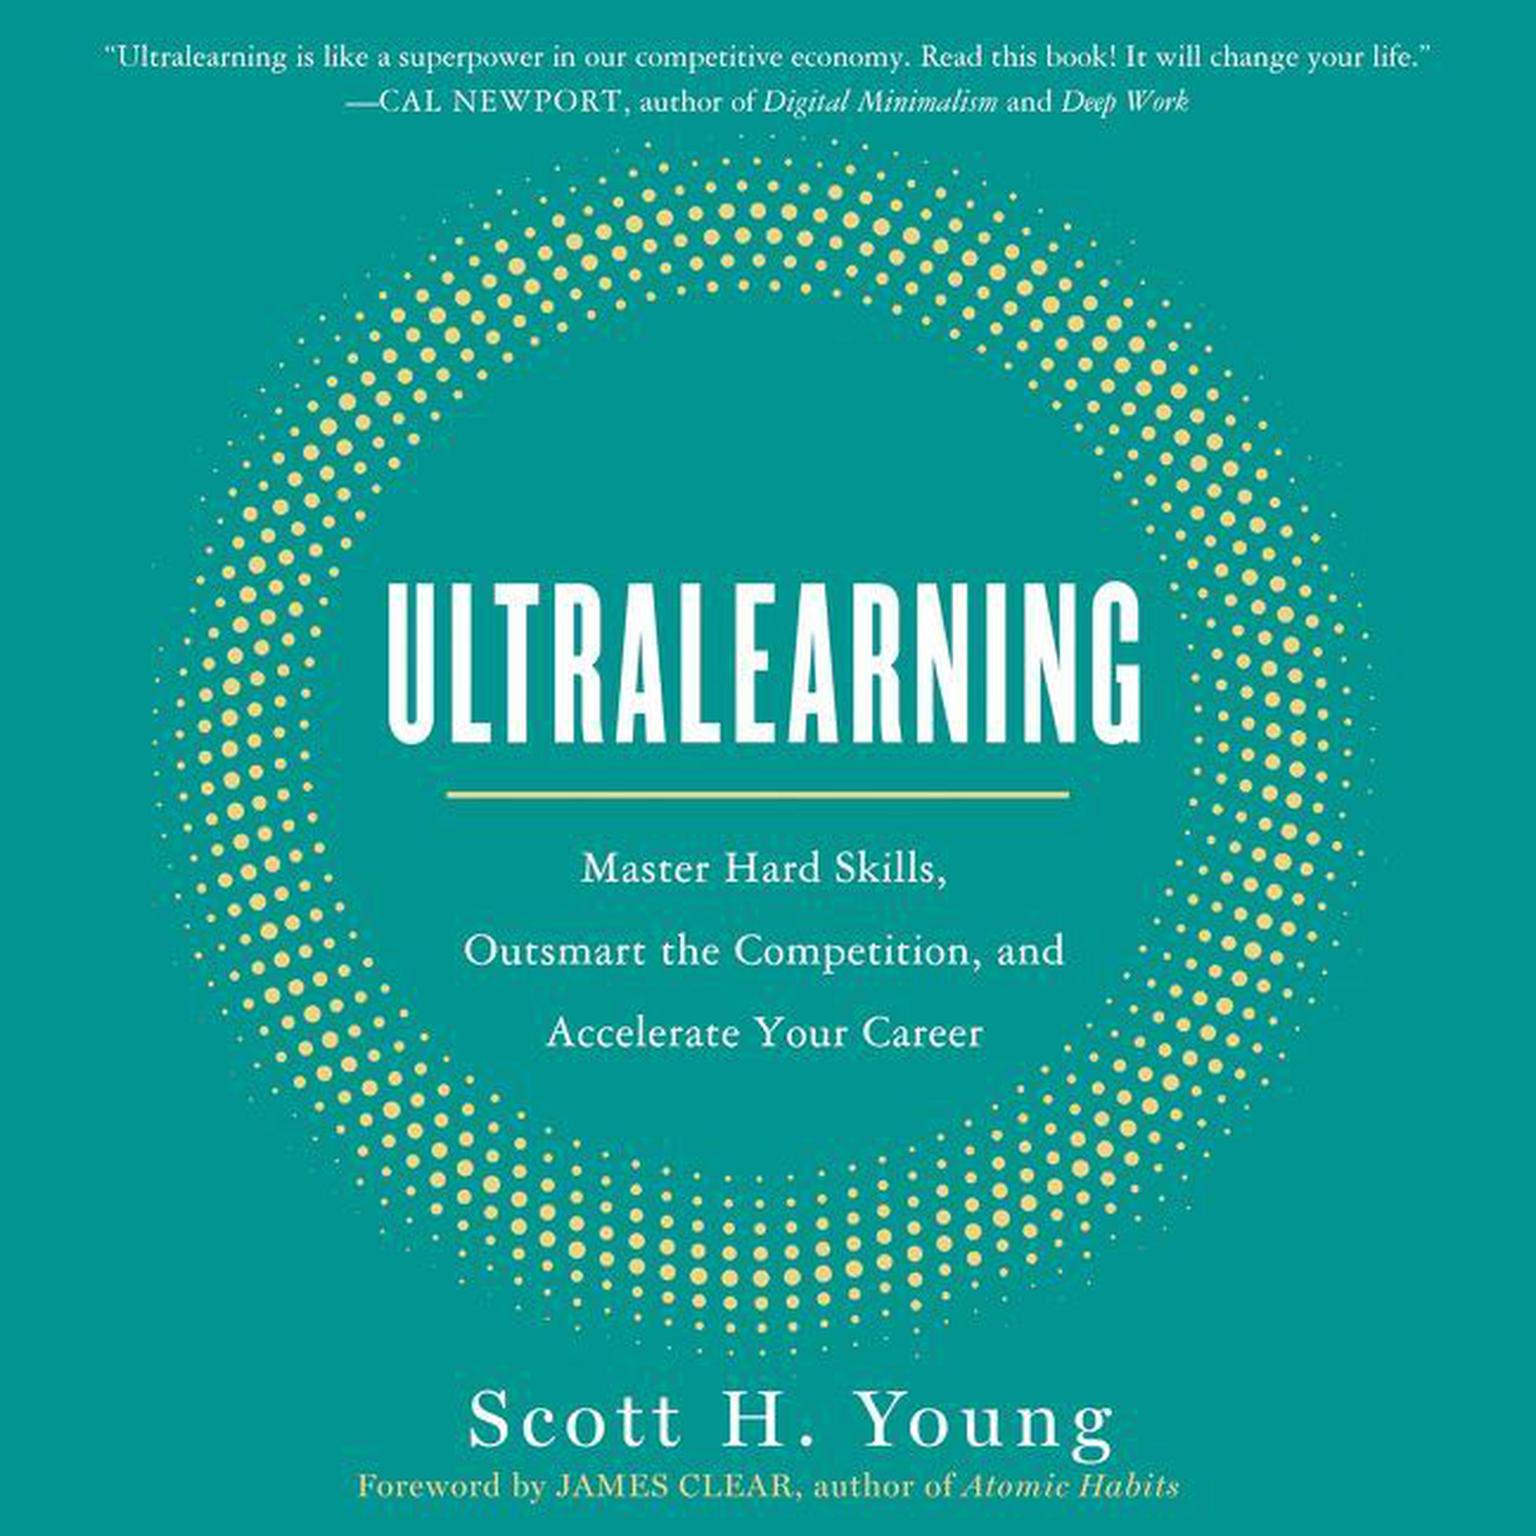 Ultralearning: Master Hard Skills, Outsmart the Competition, and Accelerate Your Career Audiobook, by Scott H. Young